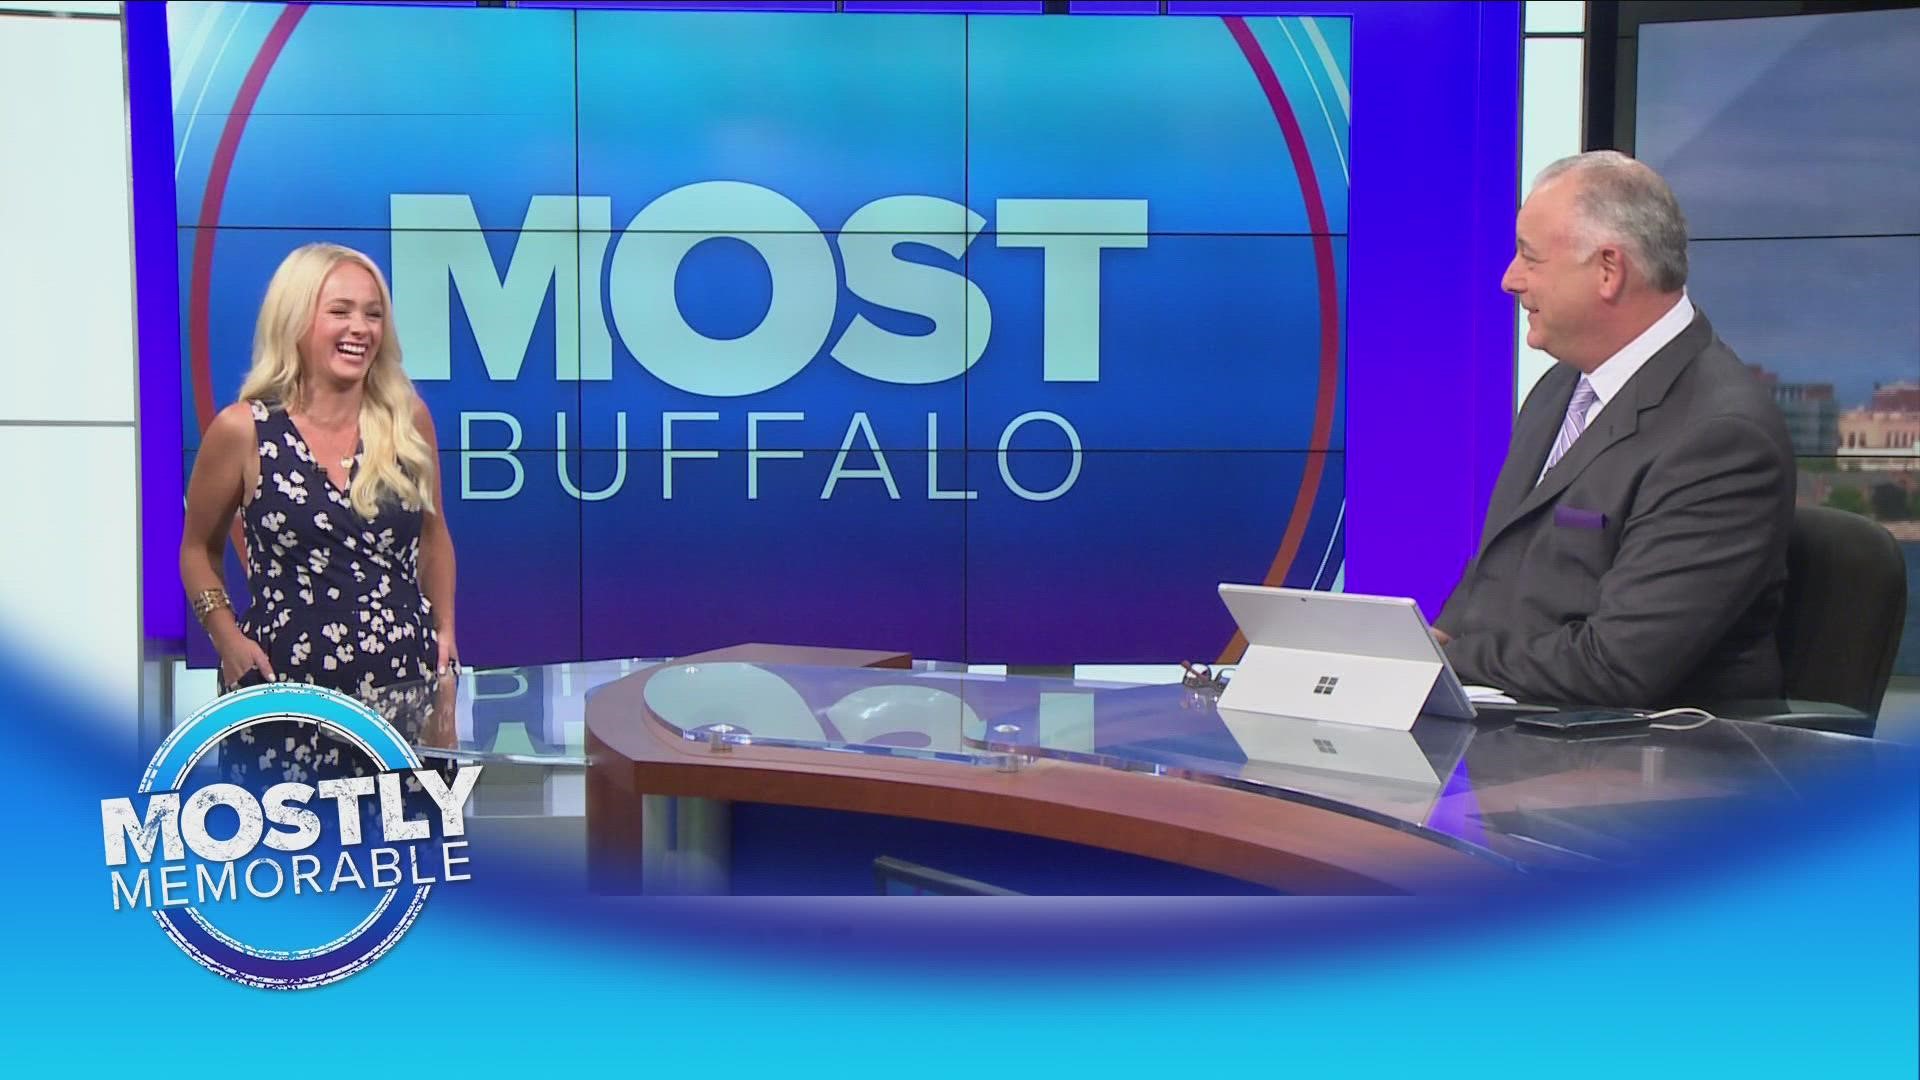 This week's Mostly Memorable moments on Most Buffalo